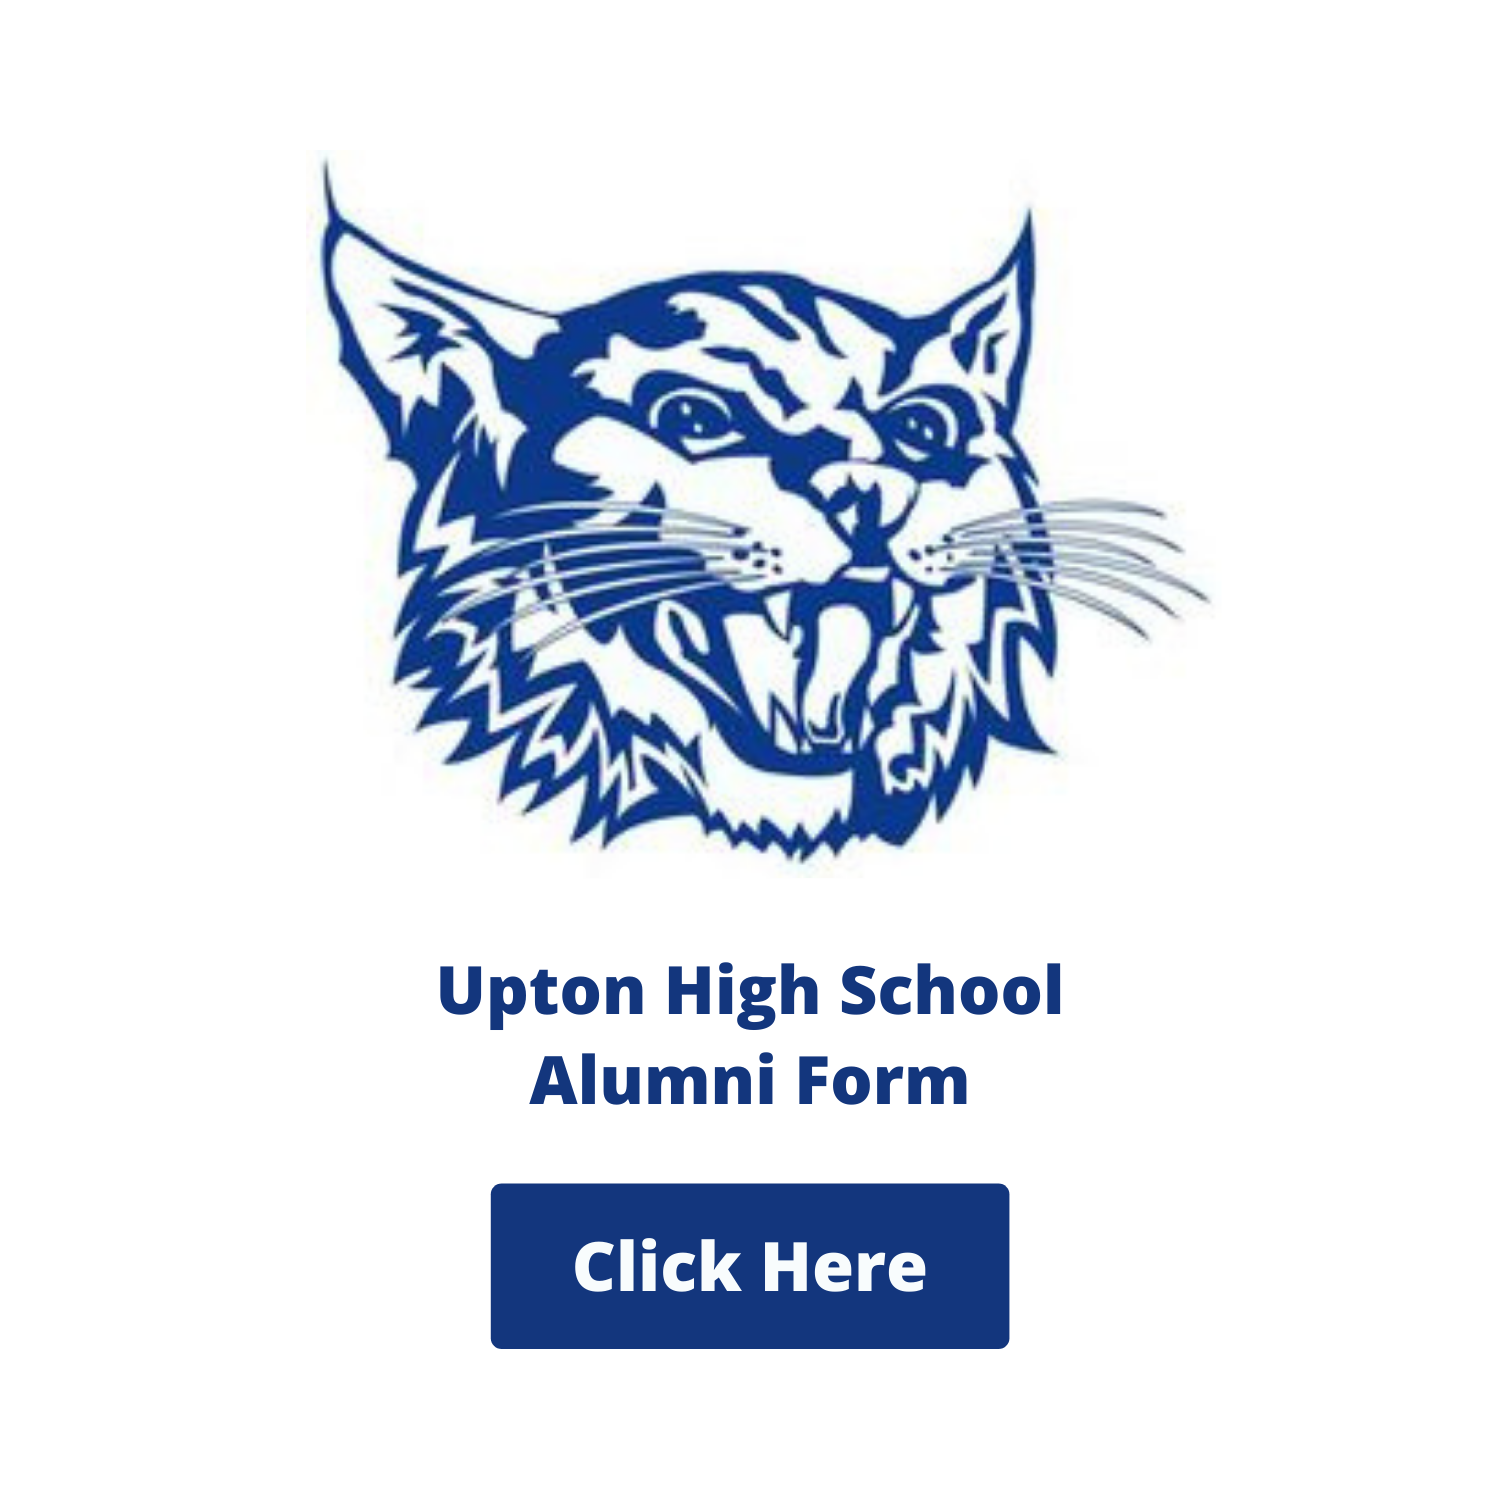 click here for the upton high school alumni form